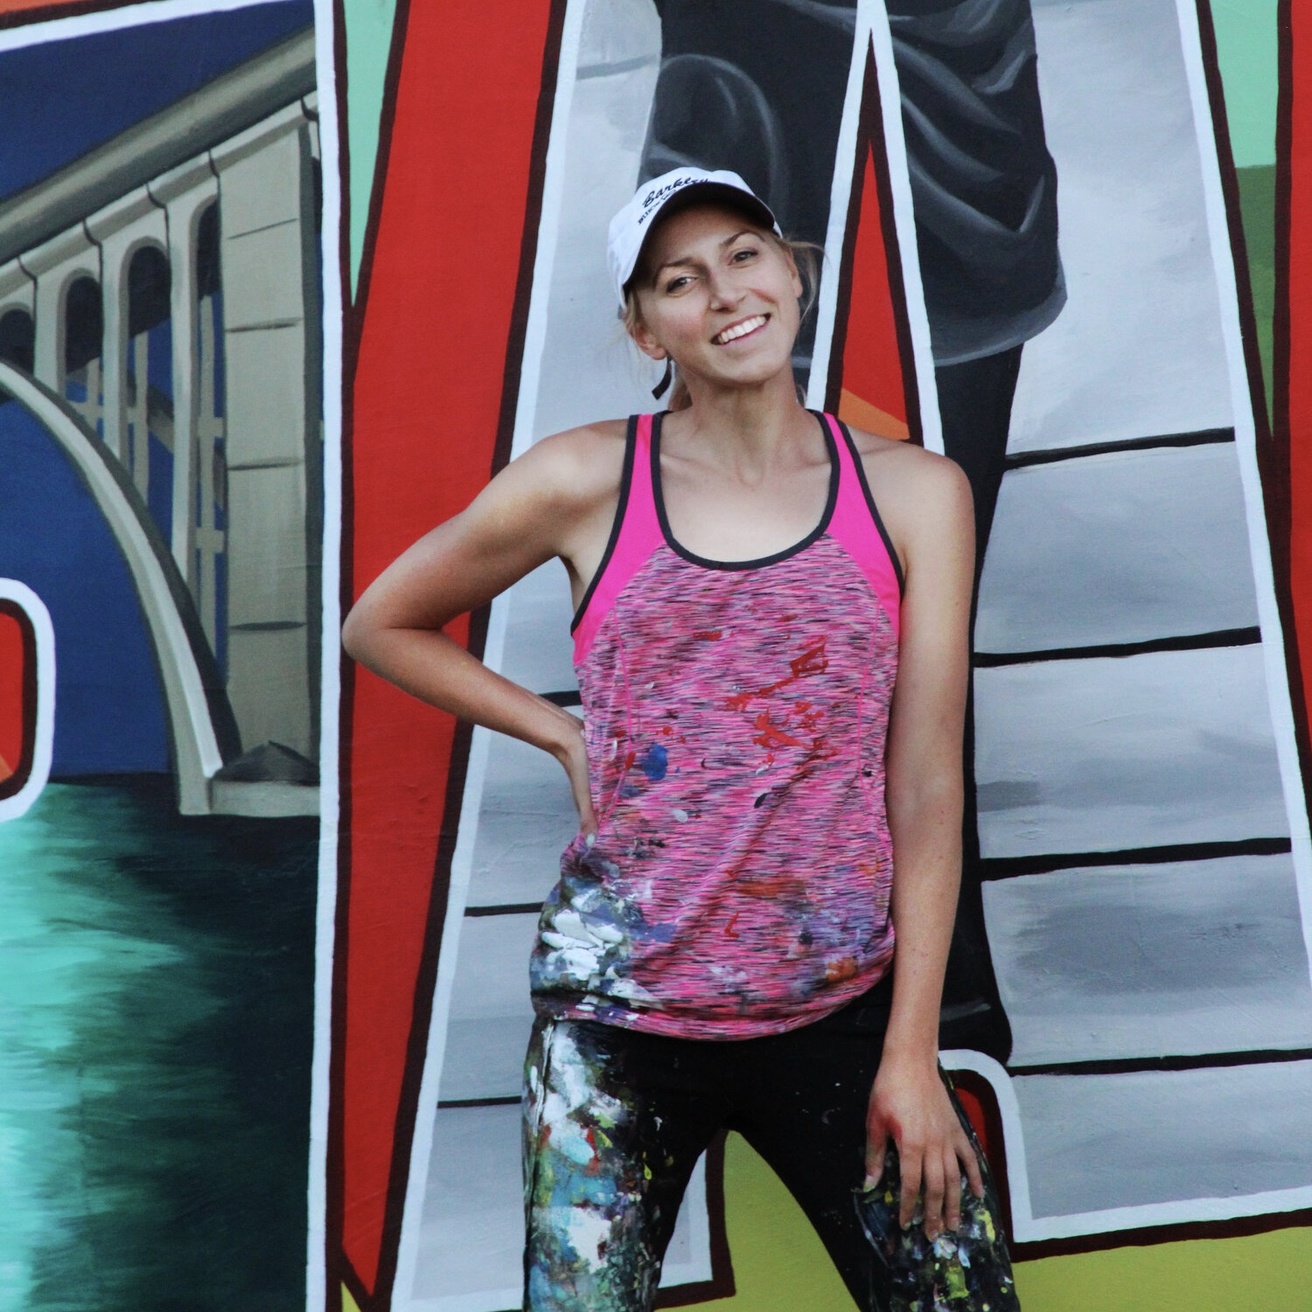 Young woman wearing a hat and splattered with paint standing in front of a mural and smiling.